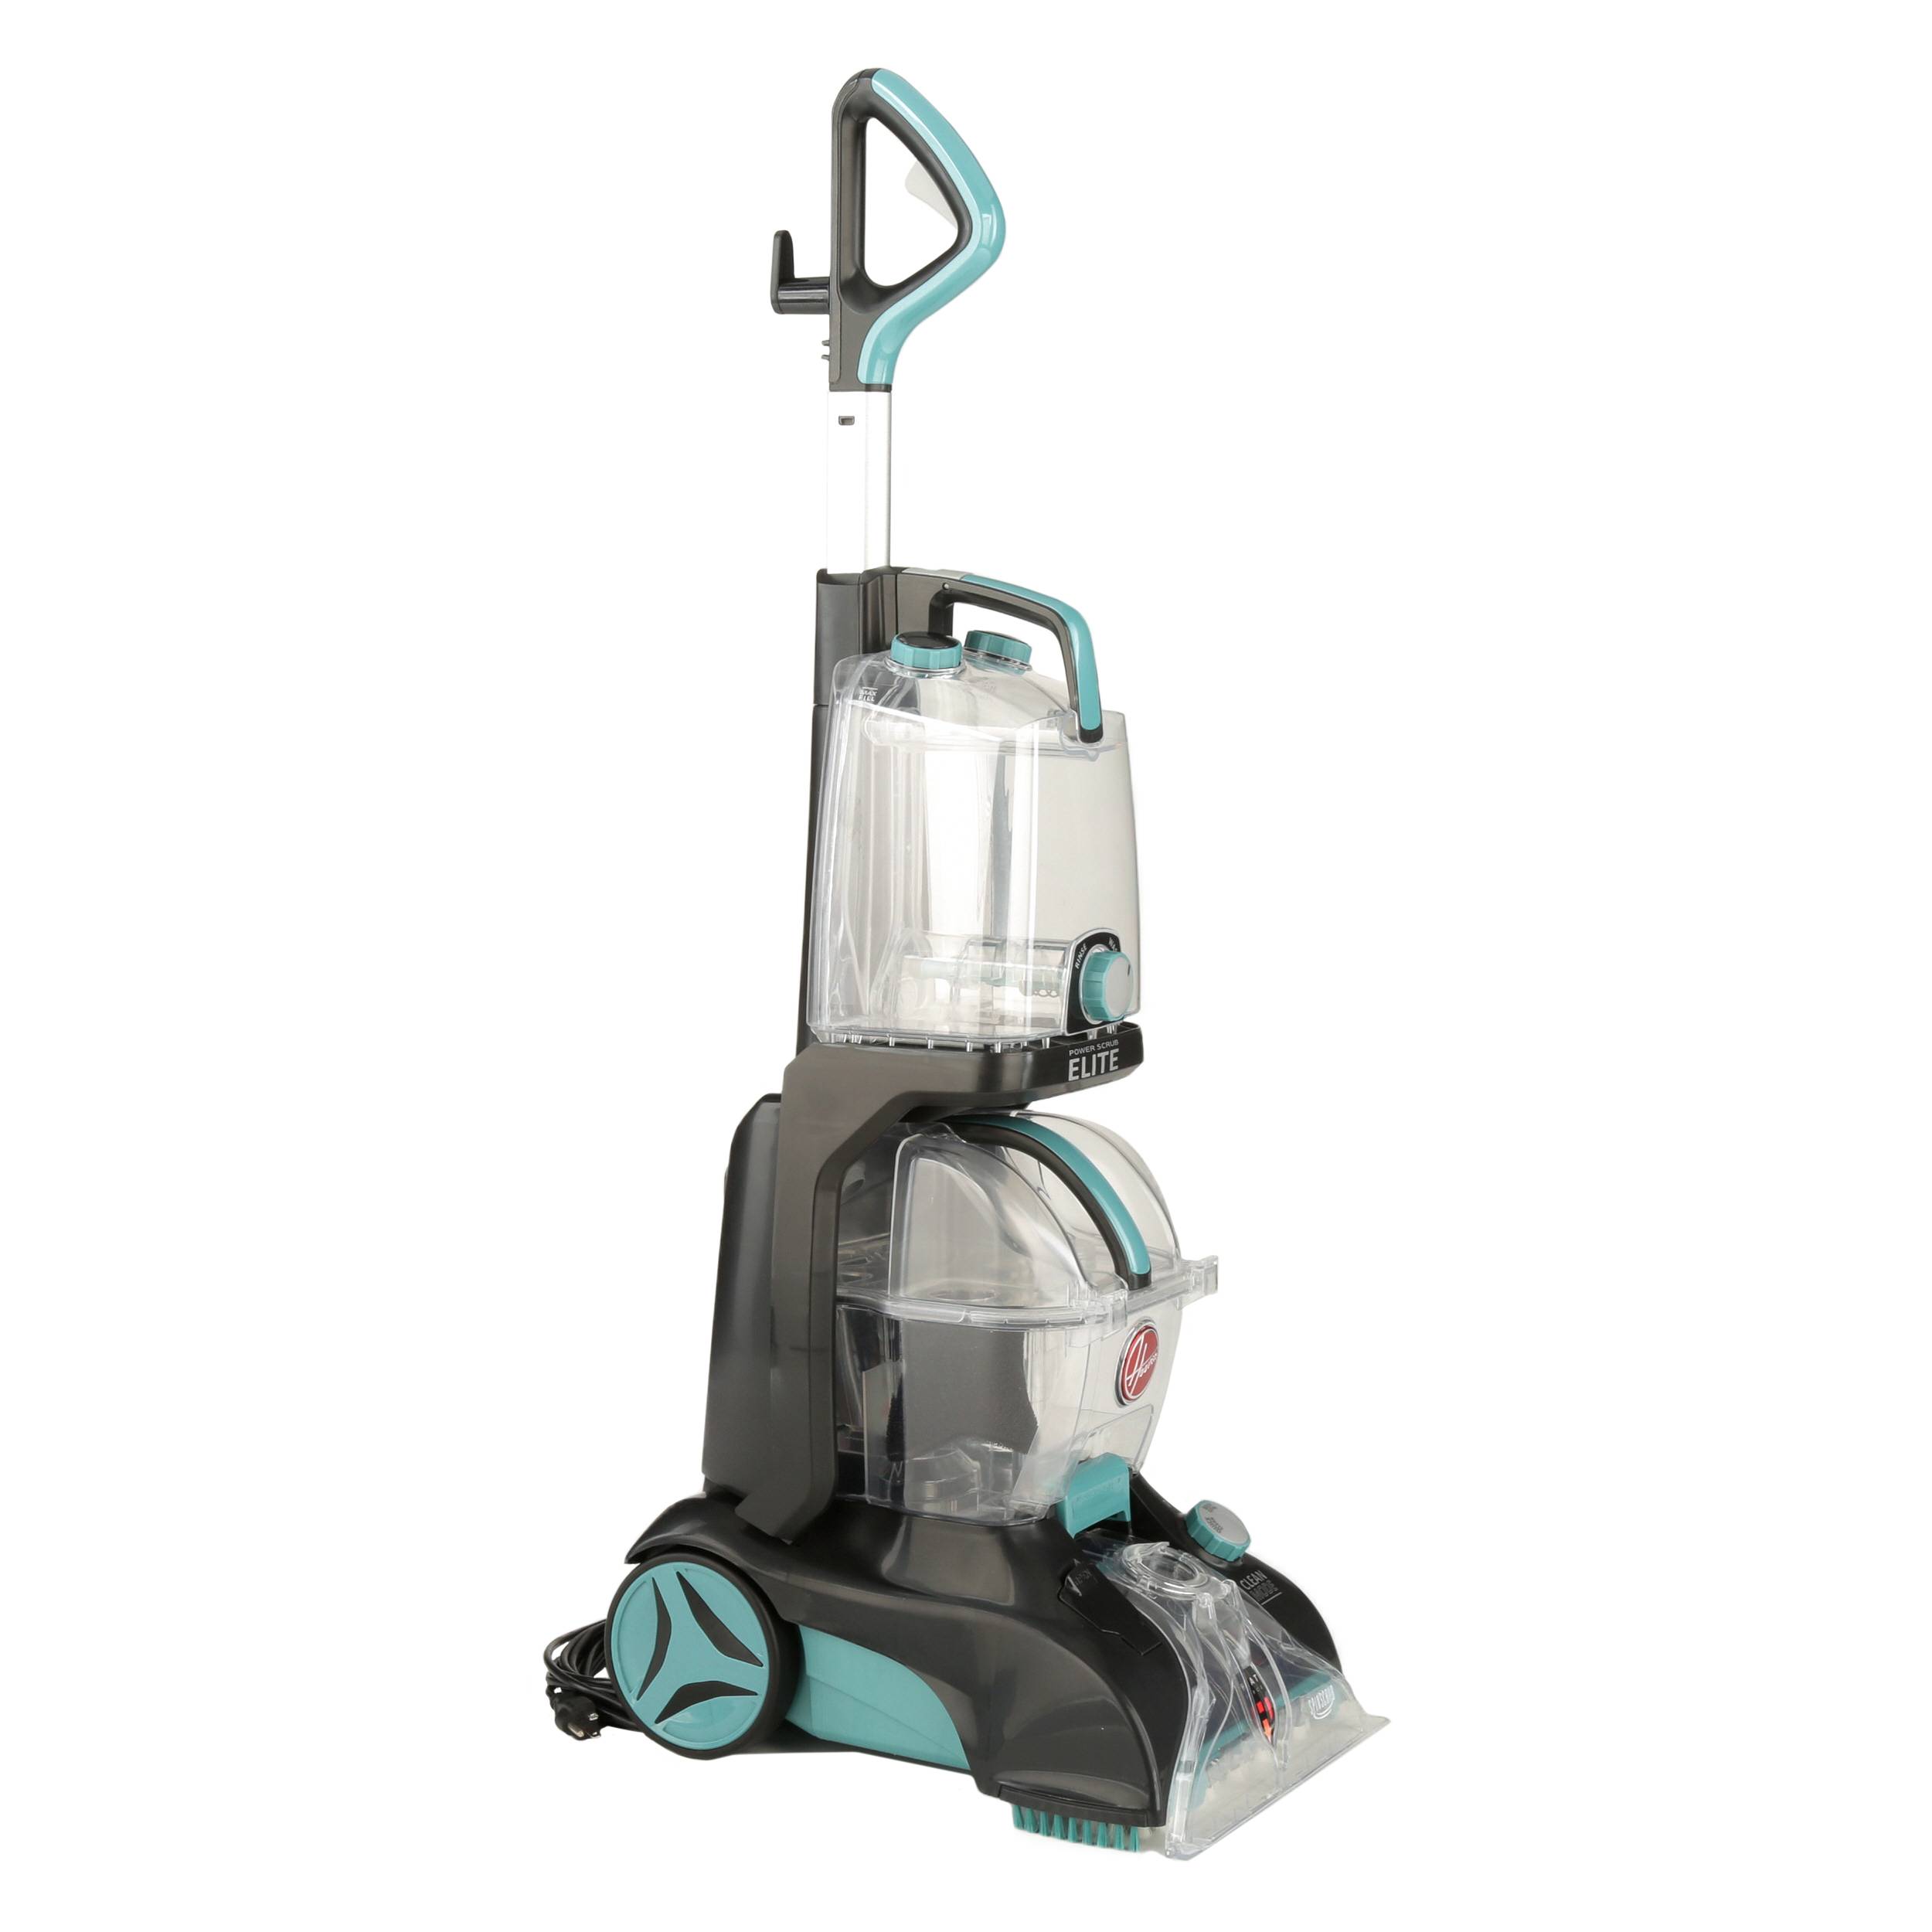 Hoover Power Scrub Elite Pet Carpet Cleaner Attachment for FH50250